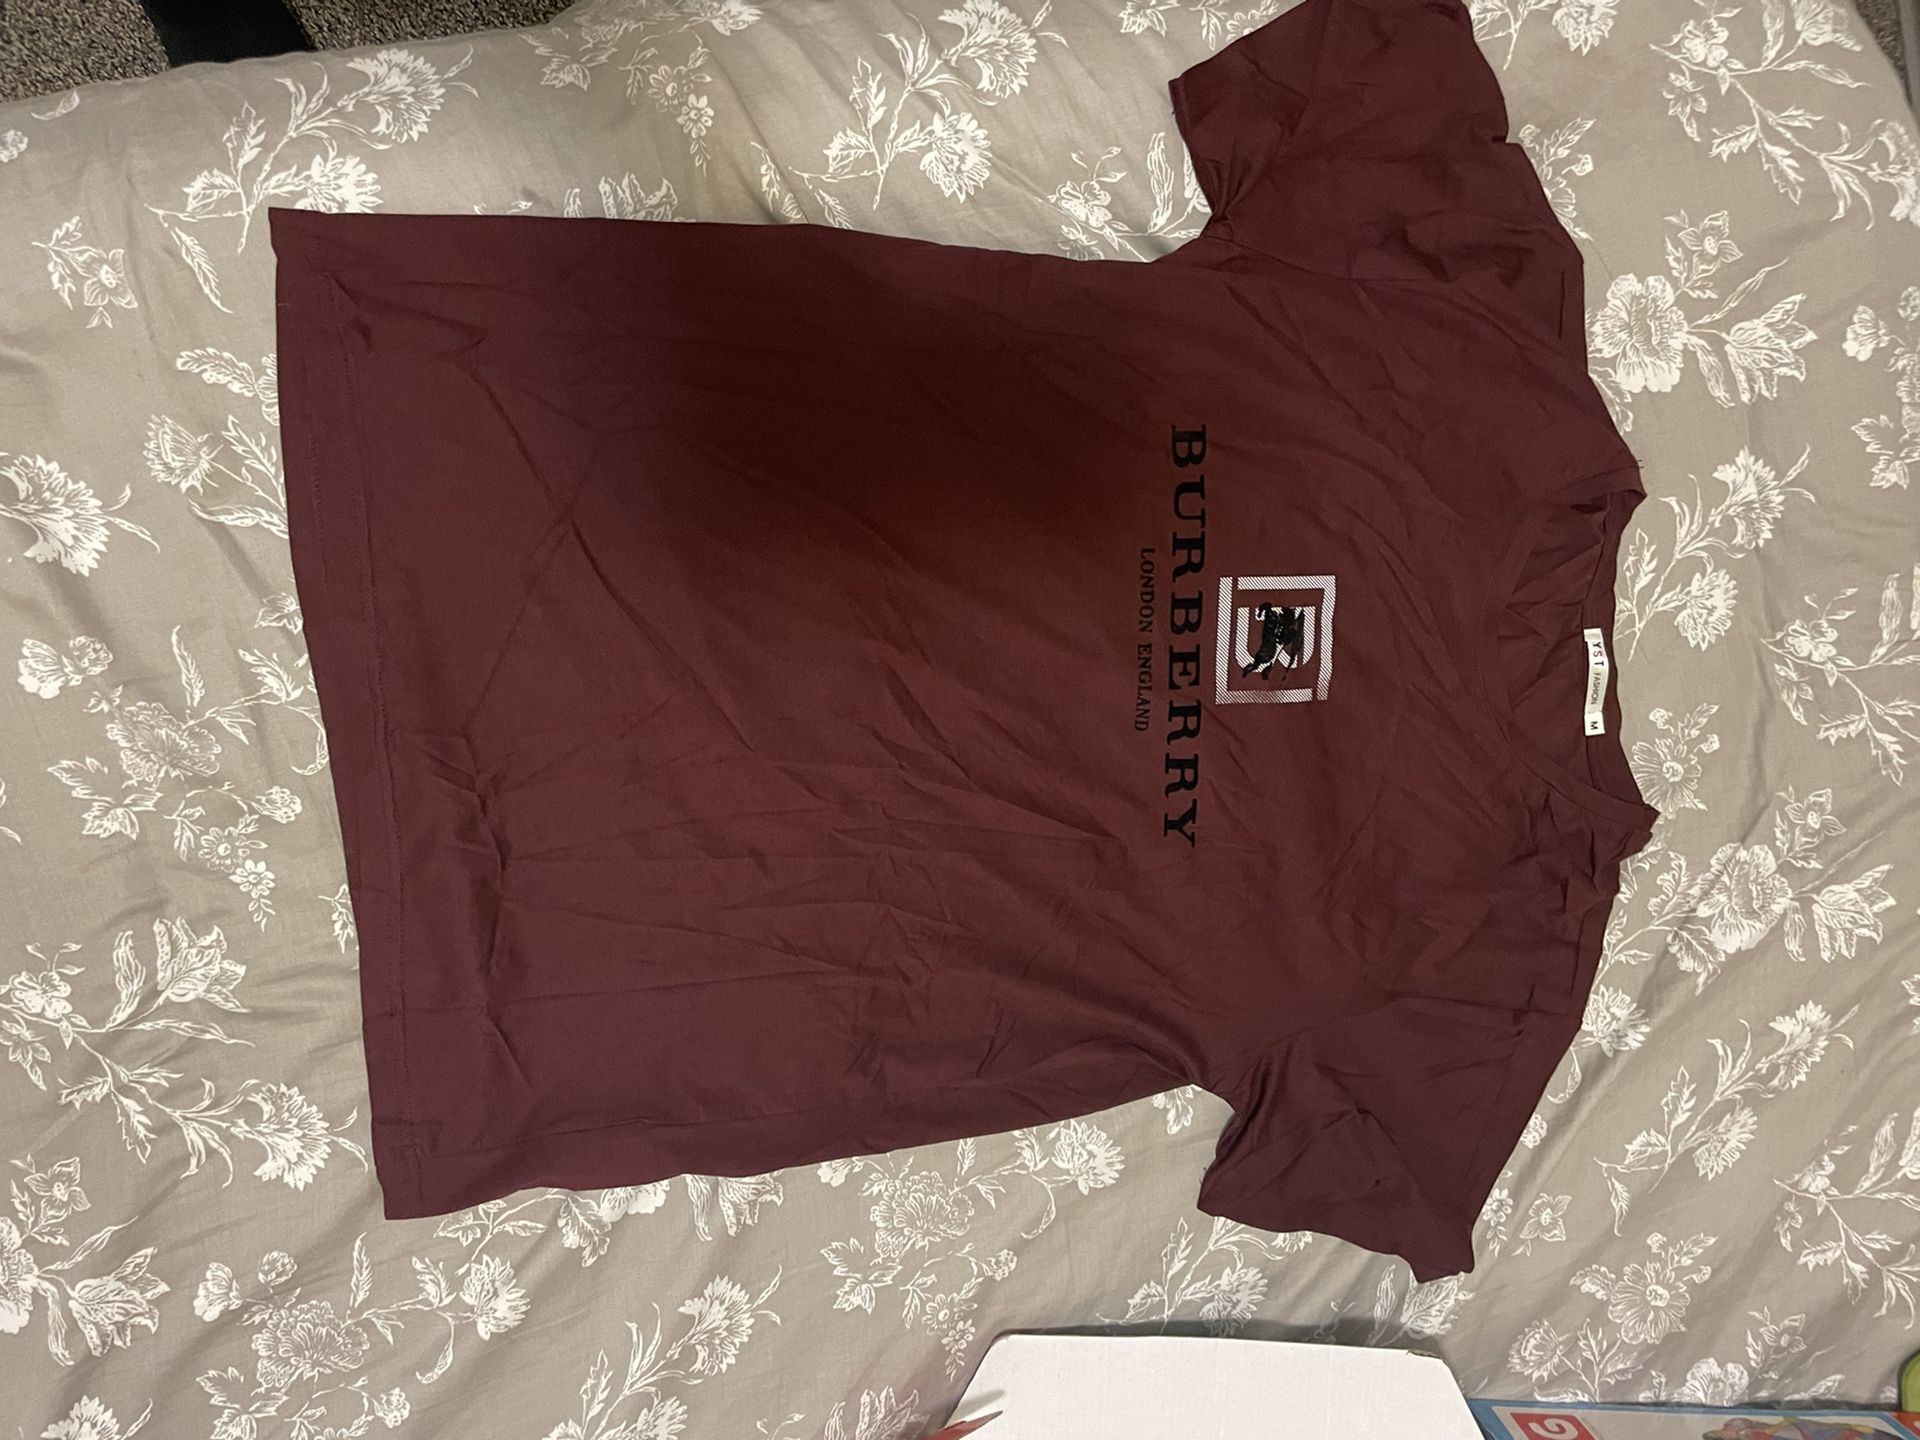 T-shirt from the brand Burberry London England